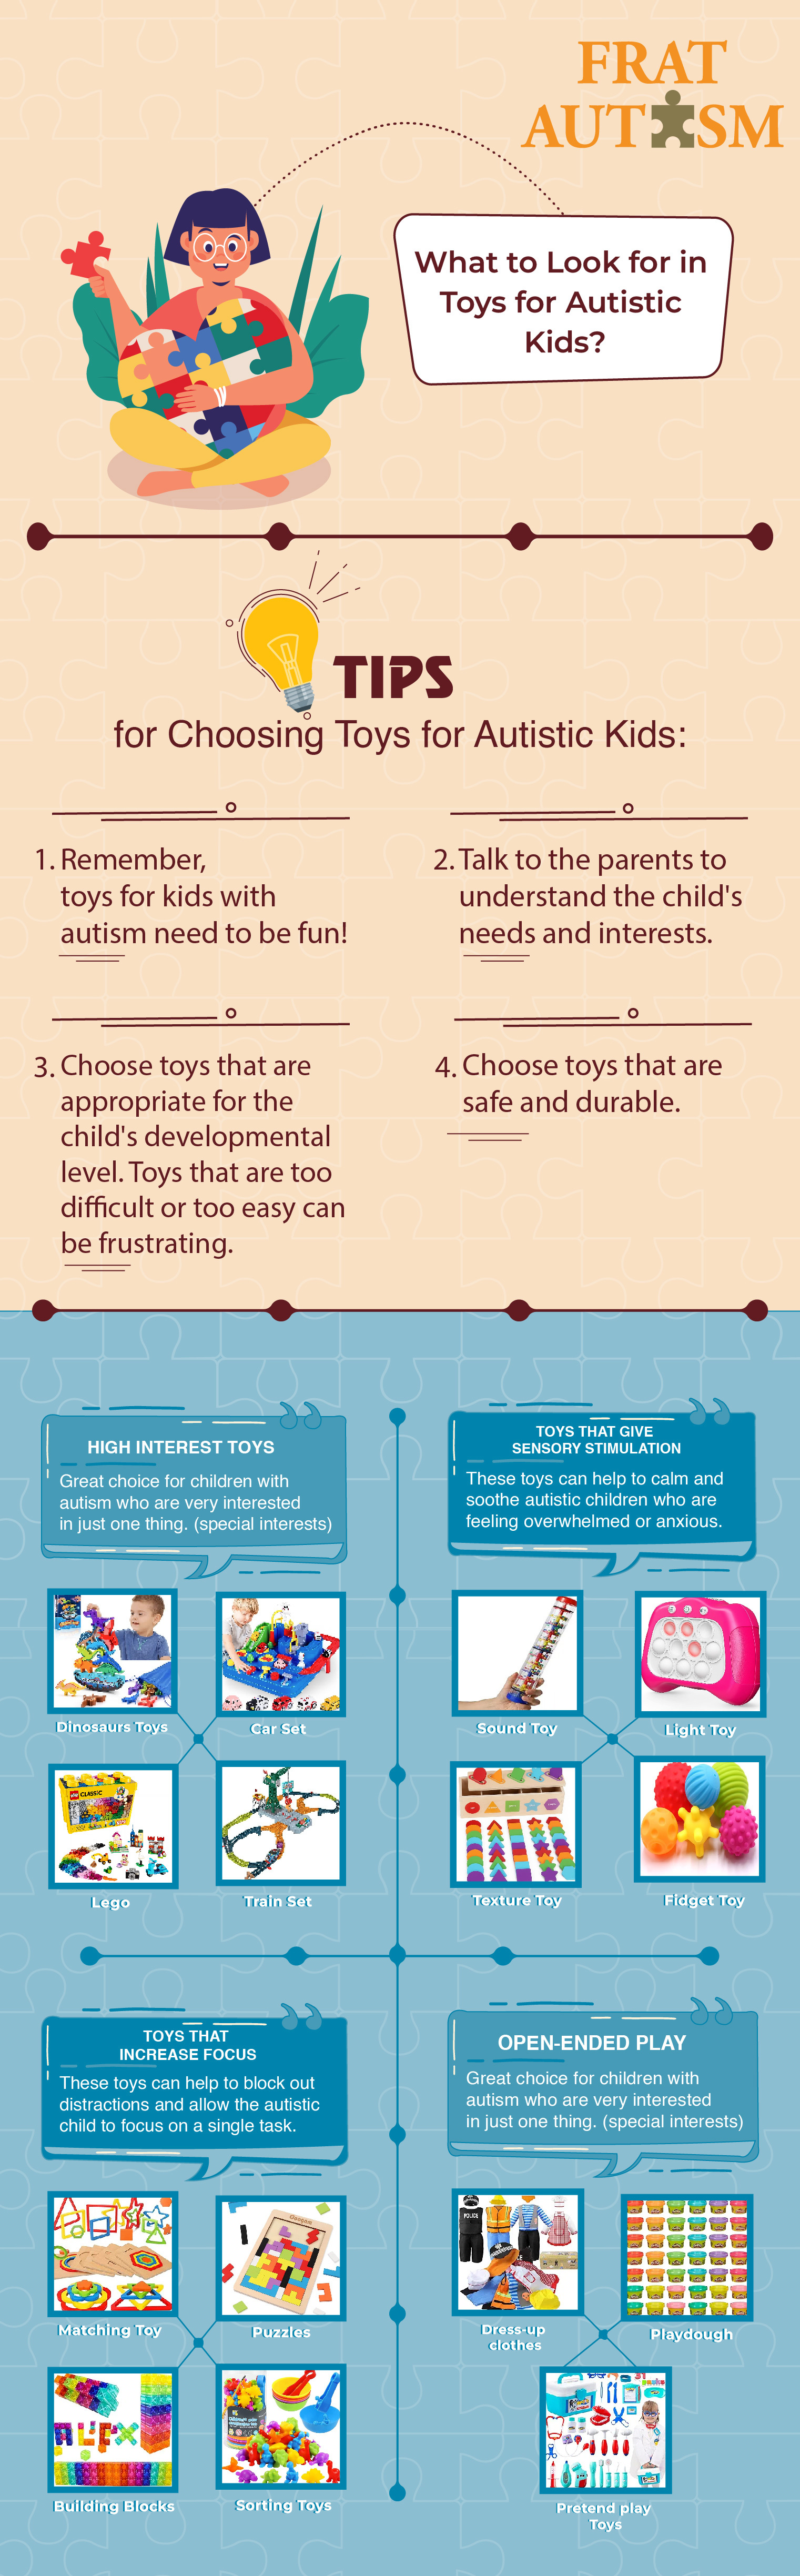 A visual guide on choosing toys for autistic children